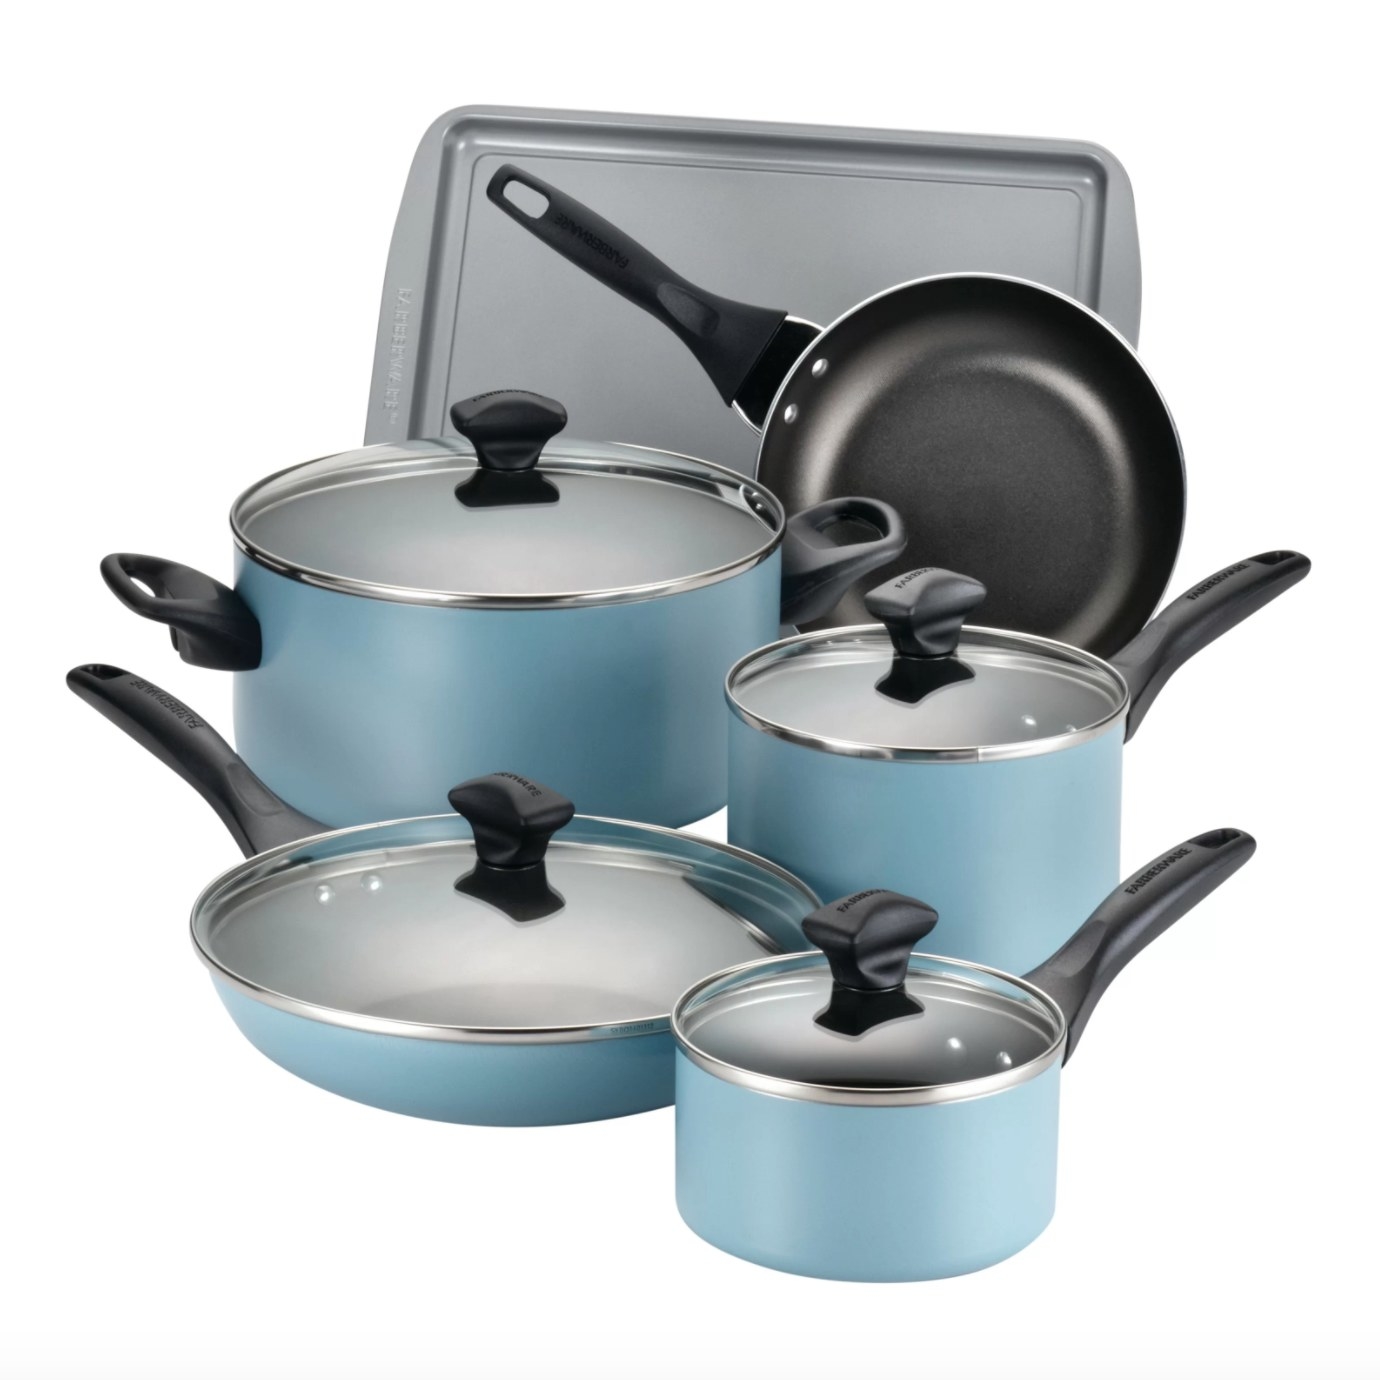 The cookware set in light blue